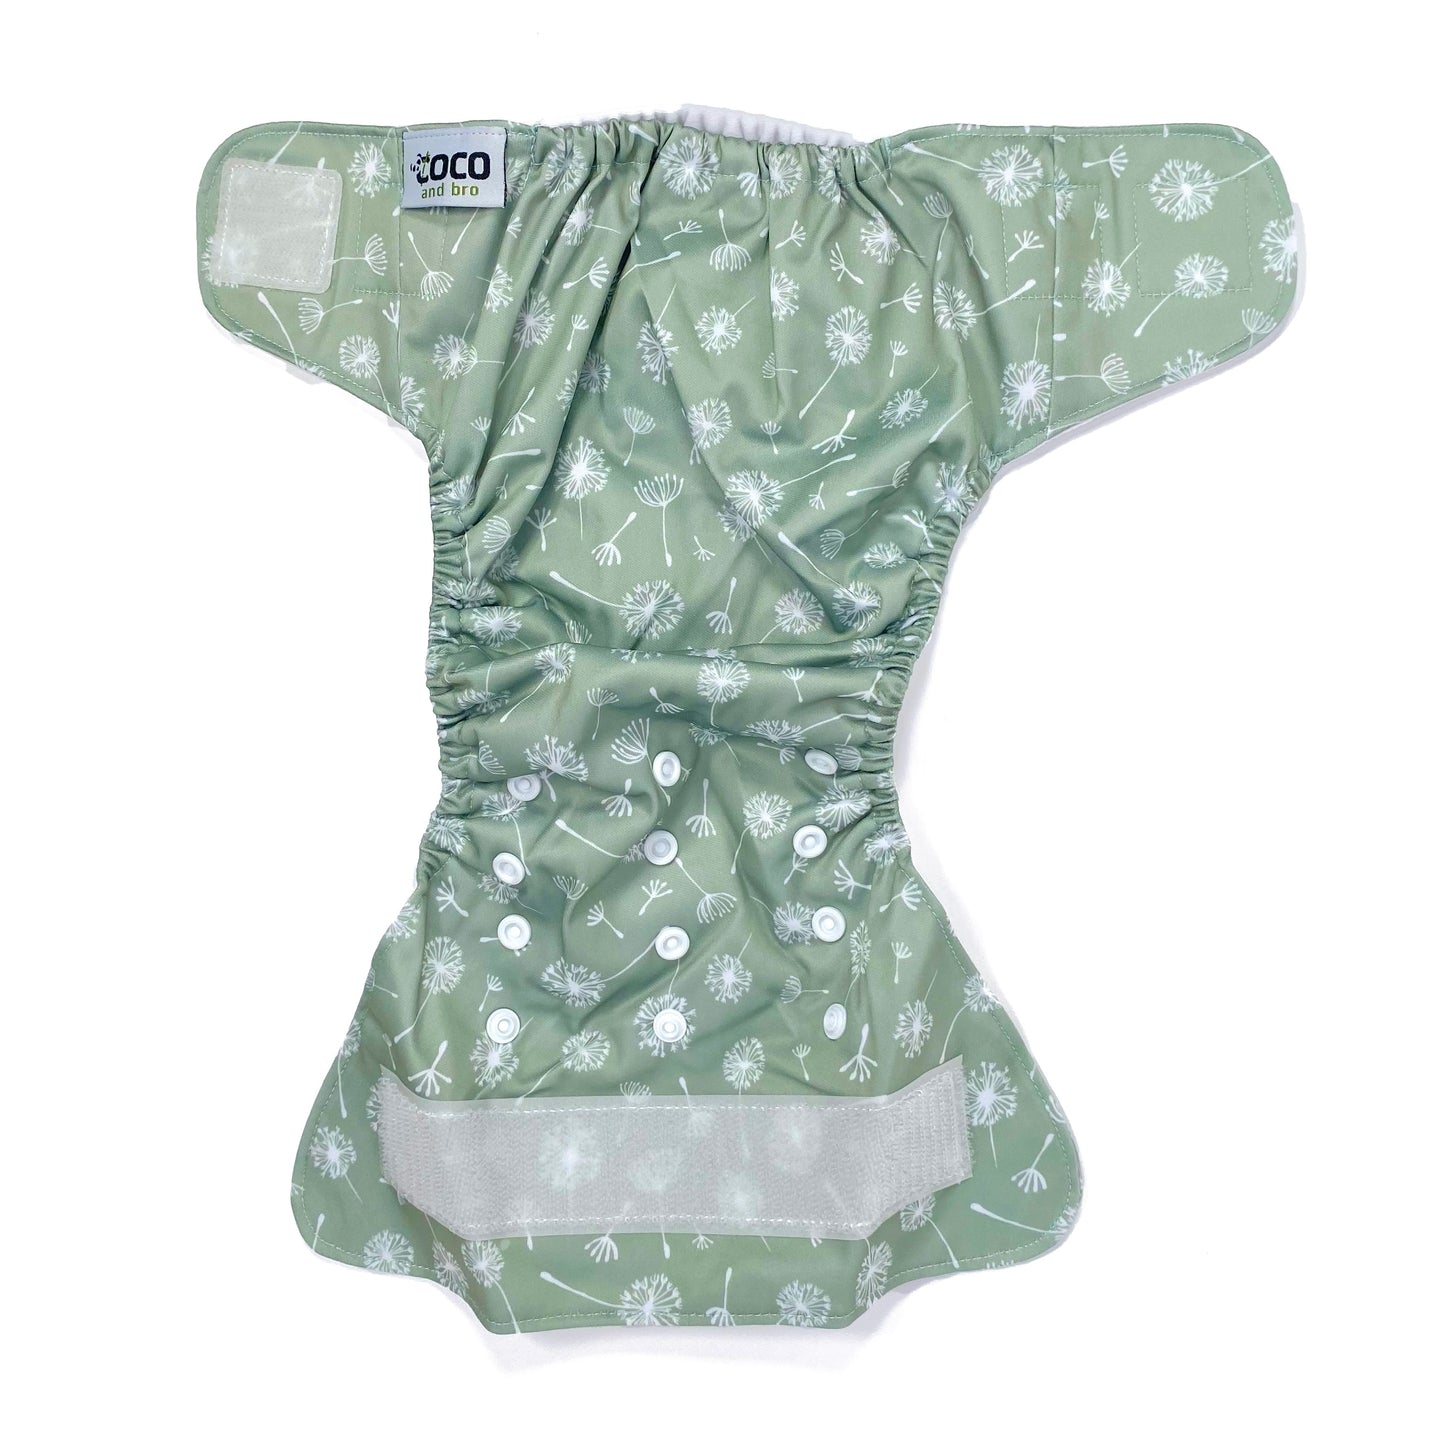 An adjustable reusable nappy for babies and toddlers, featuring a green dandelion design, with images of dandelion seeds on a green background. View shows the full outside pattern of the nappy, with fastenings open.